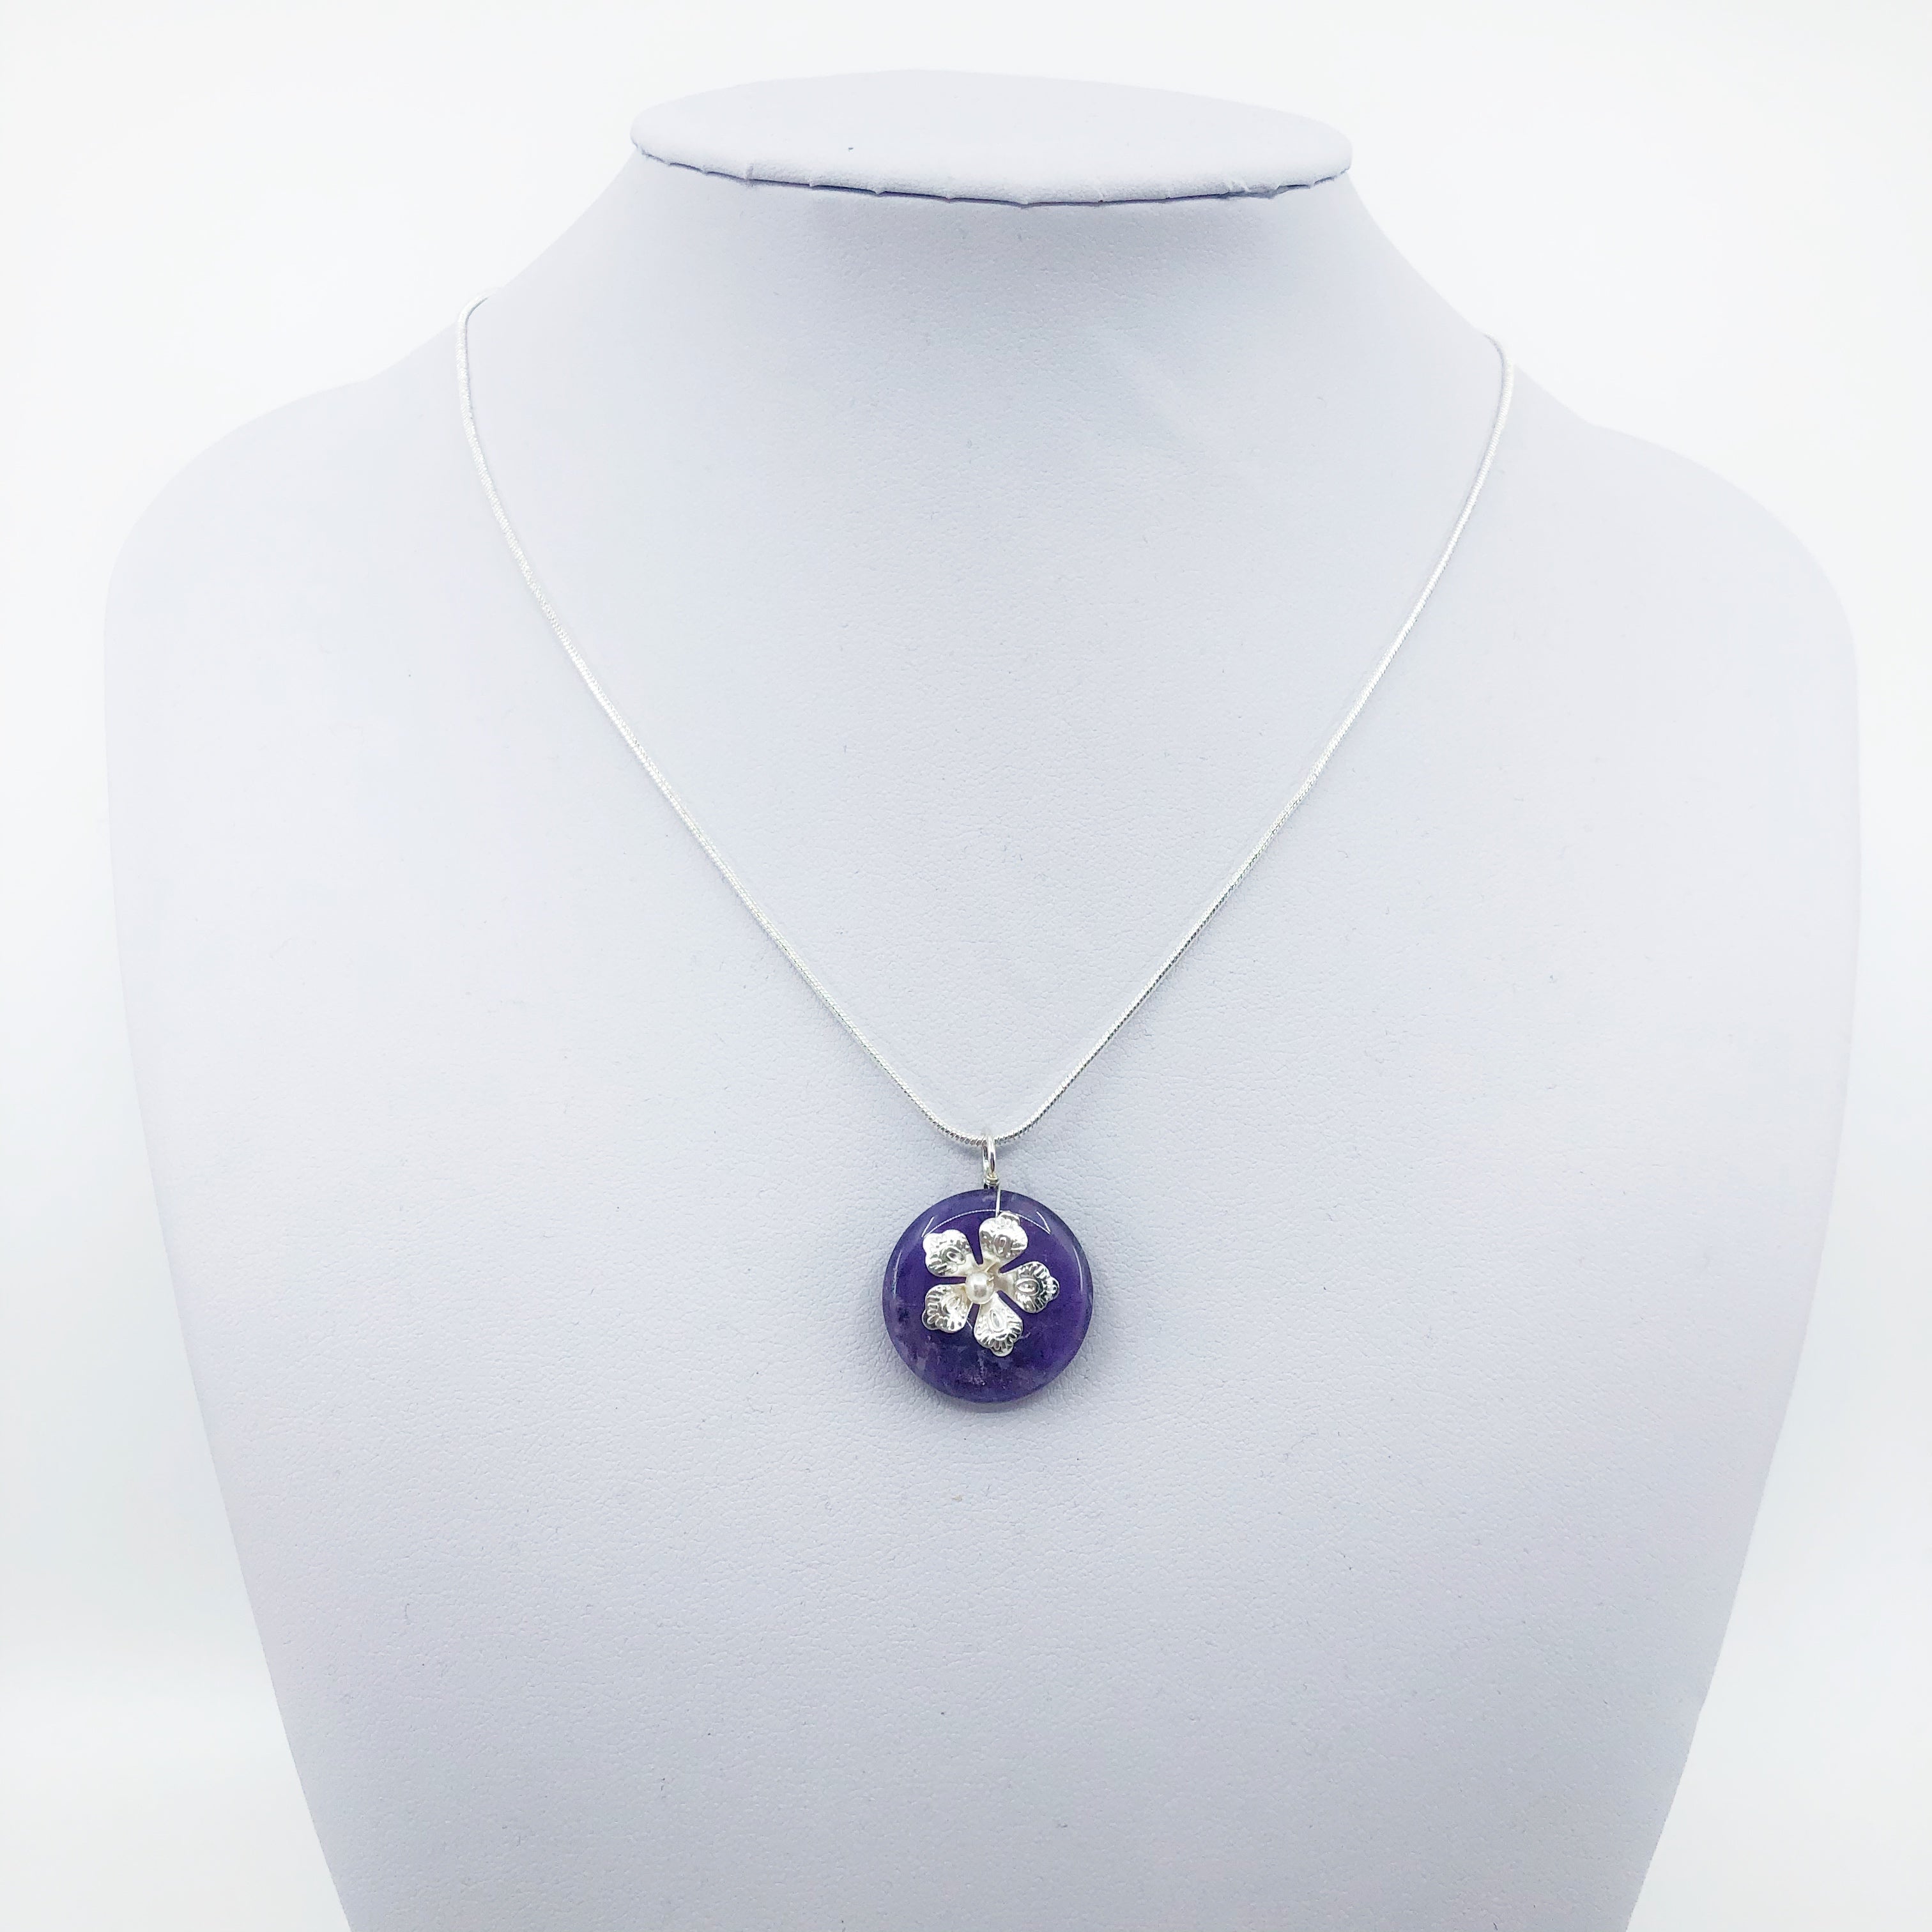 Long Silver Tone Plum Blossom Necklace With Silicone Neck Cord 